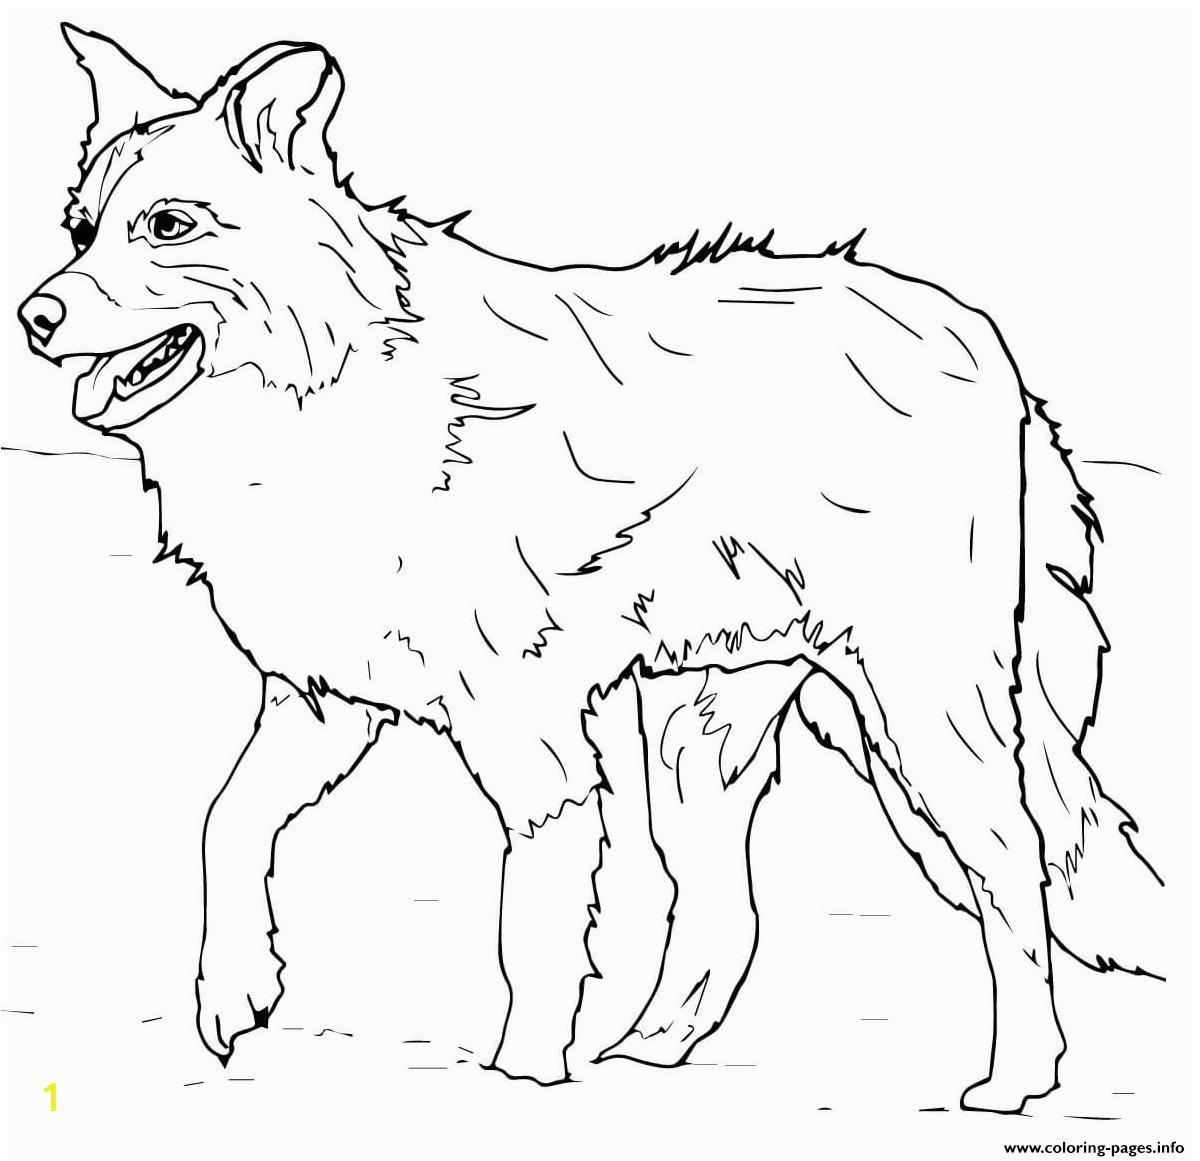 scotch sheep dog or border collie printable coloring pages book